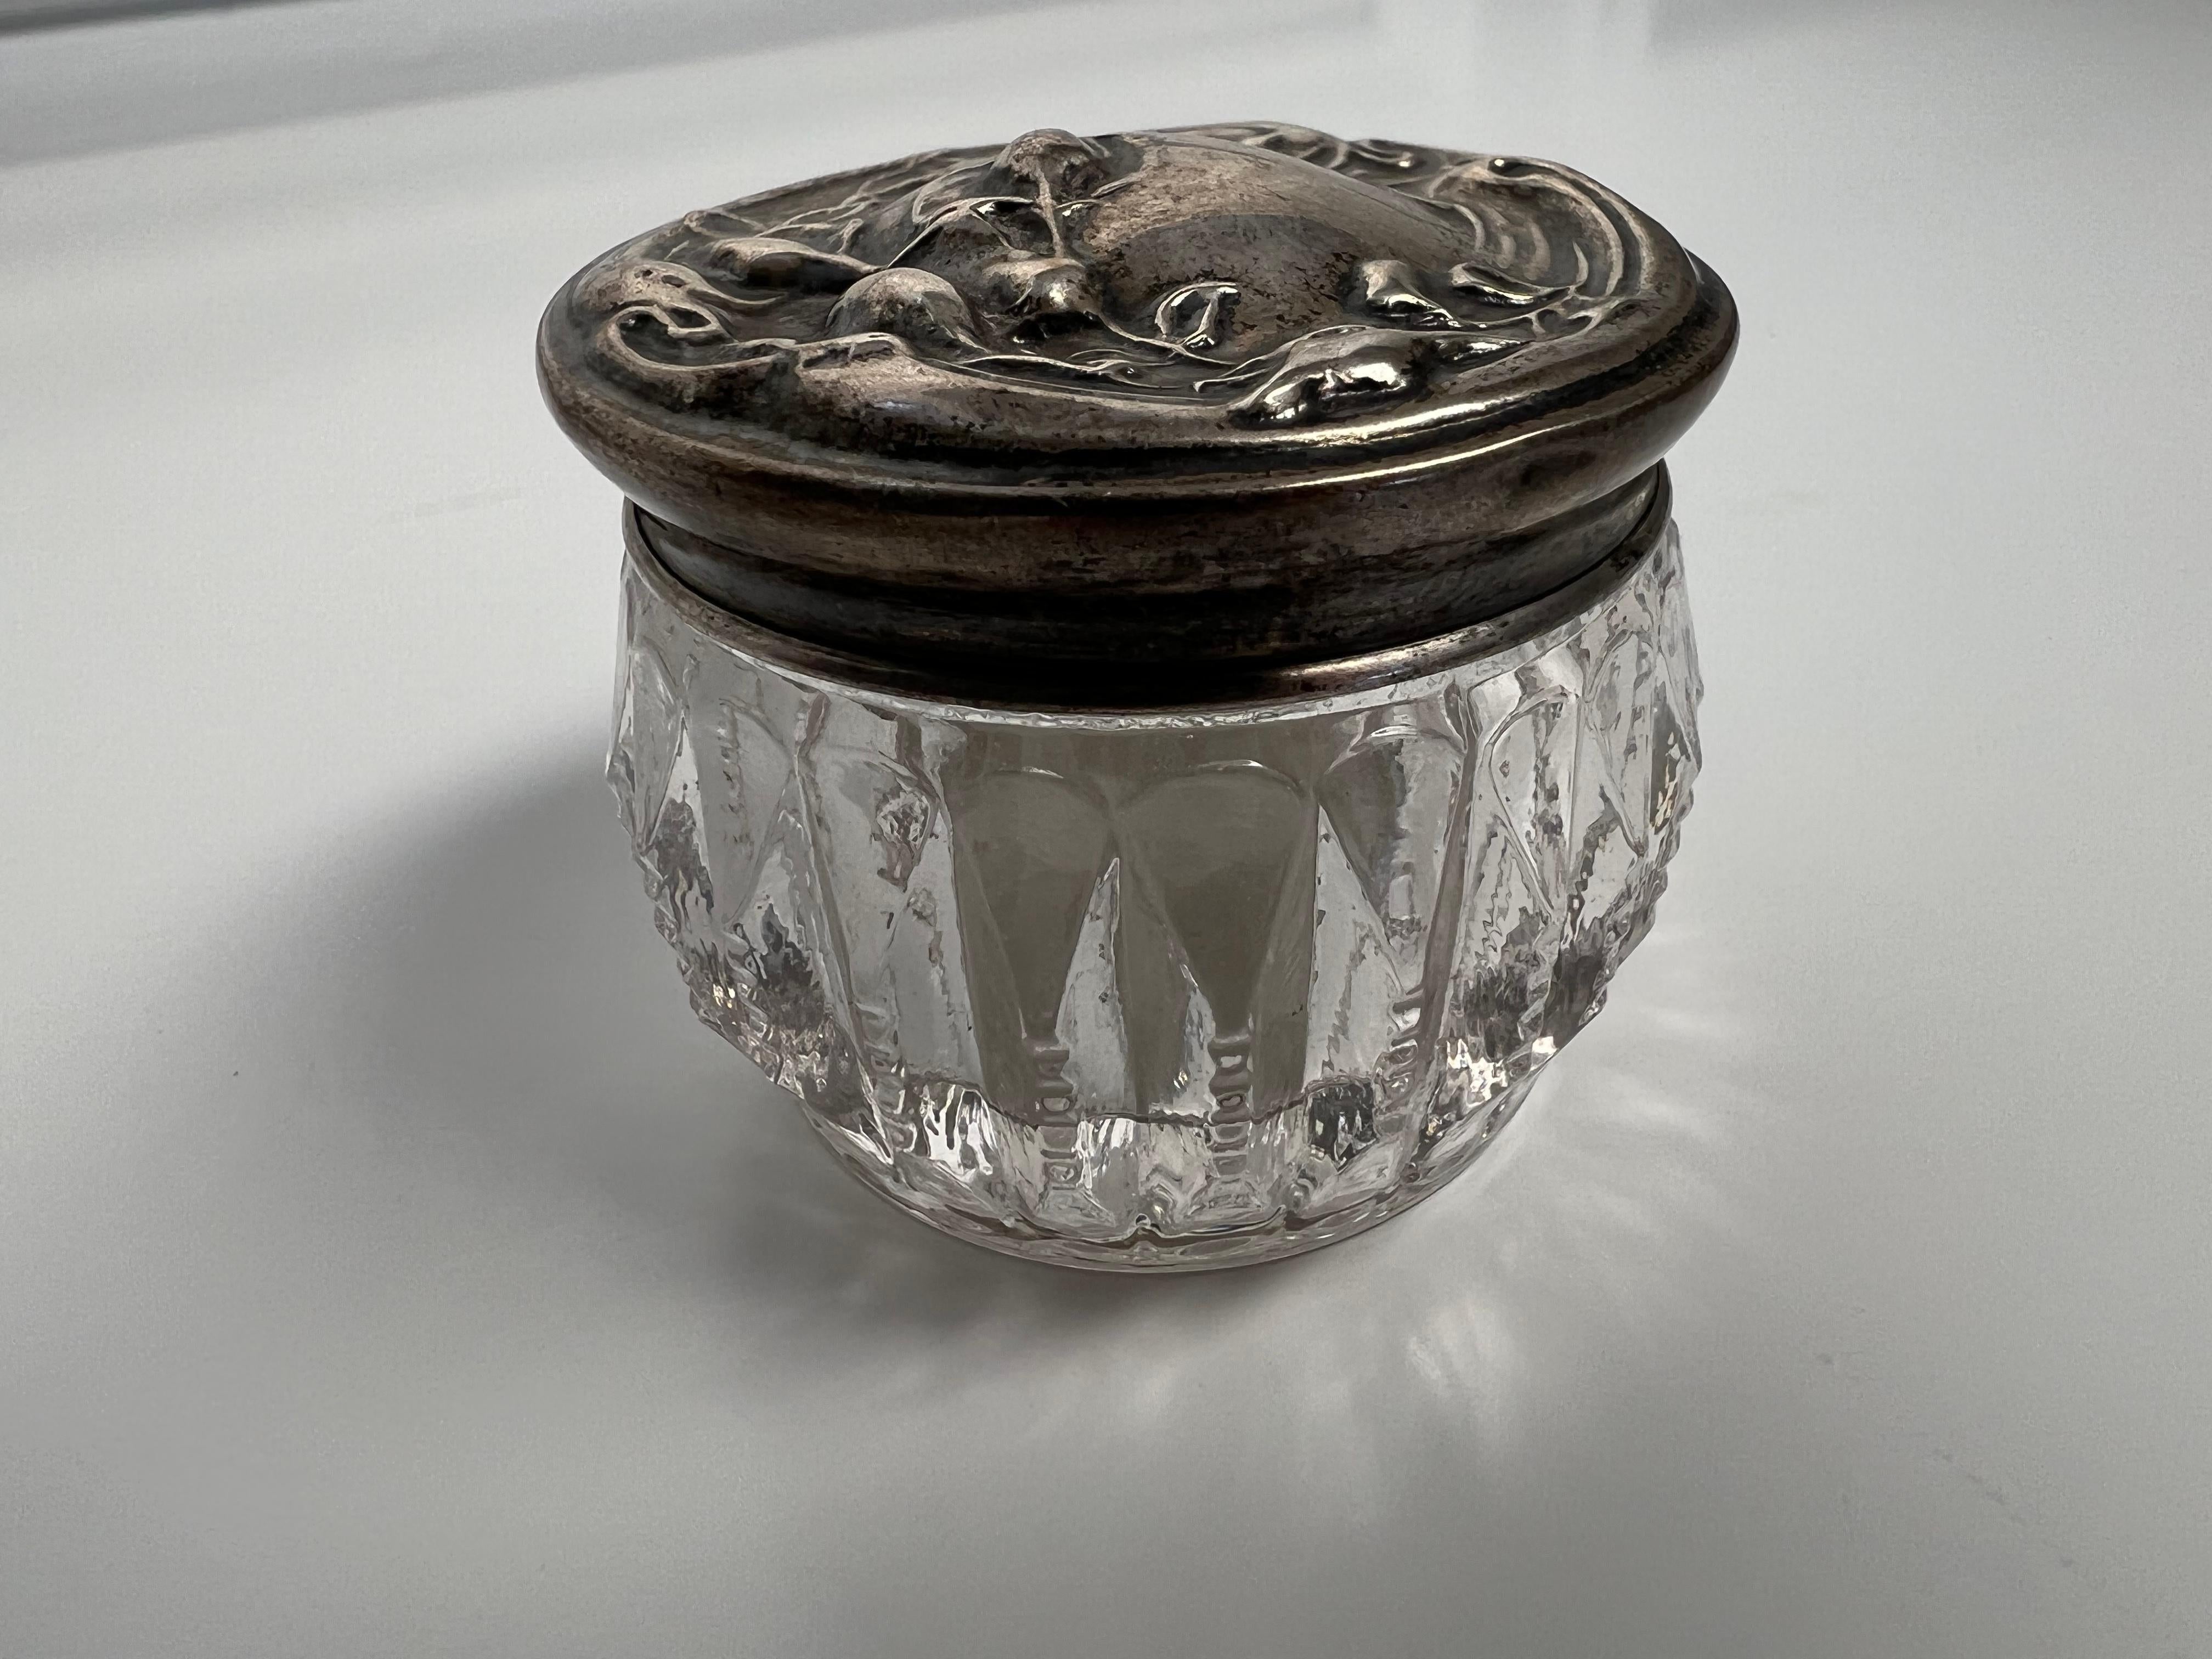 Late 20th century cut crystal dresser jar with zipper cut edge and a decorative sterling silver top. From a private collector who traveled the world buying beautiful items.